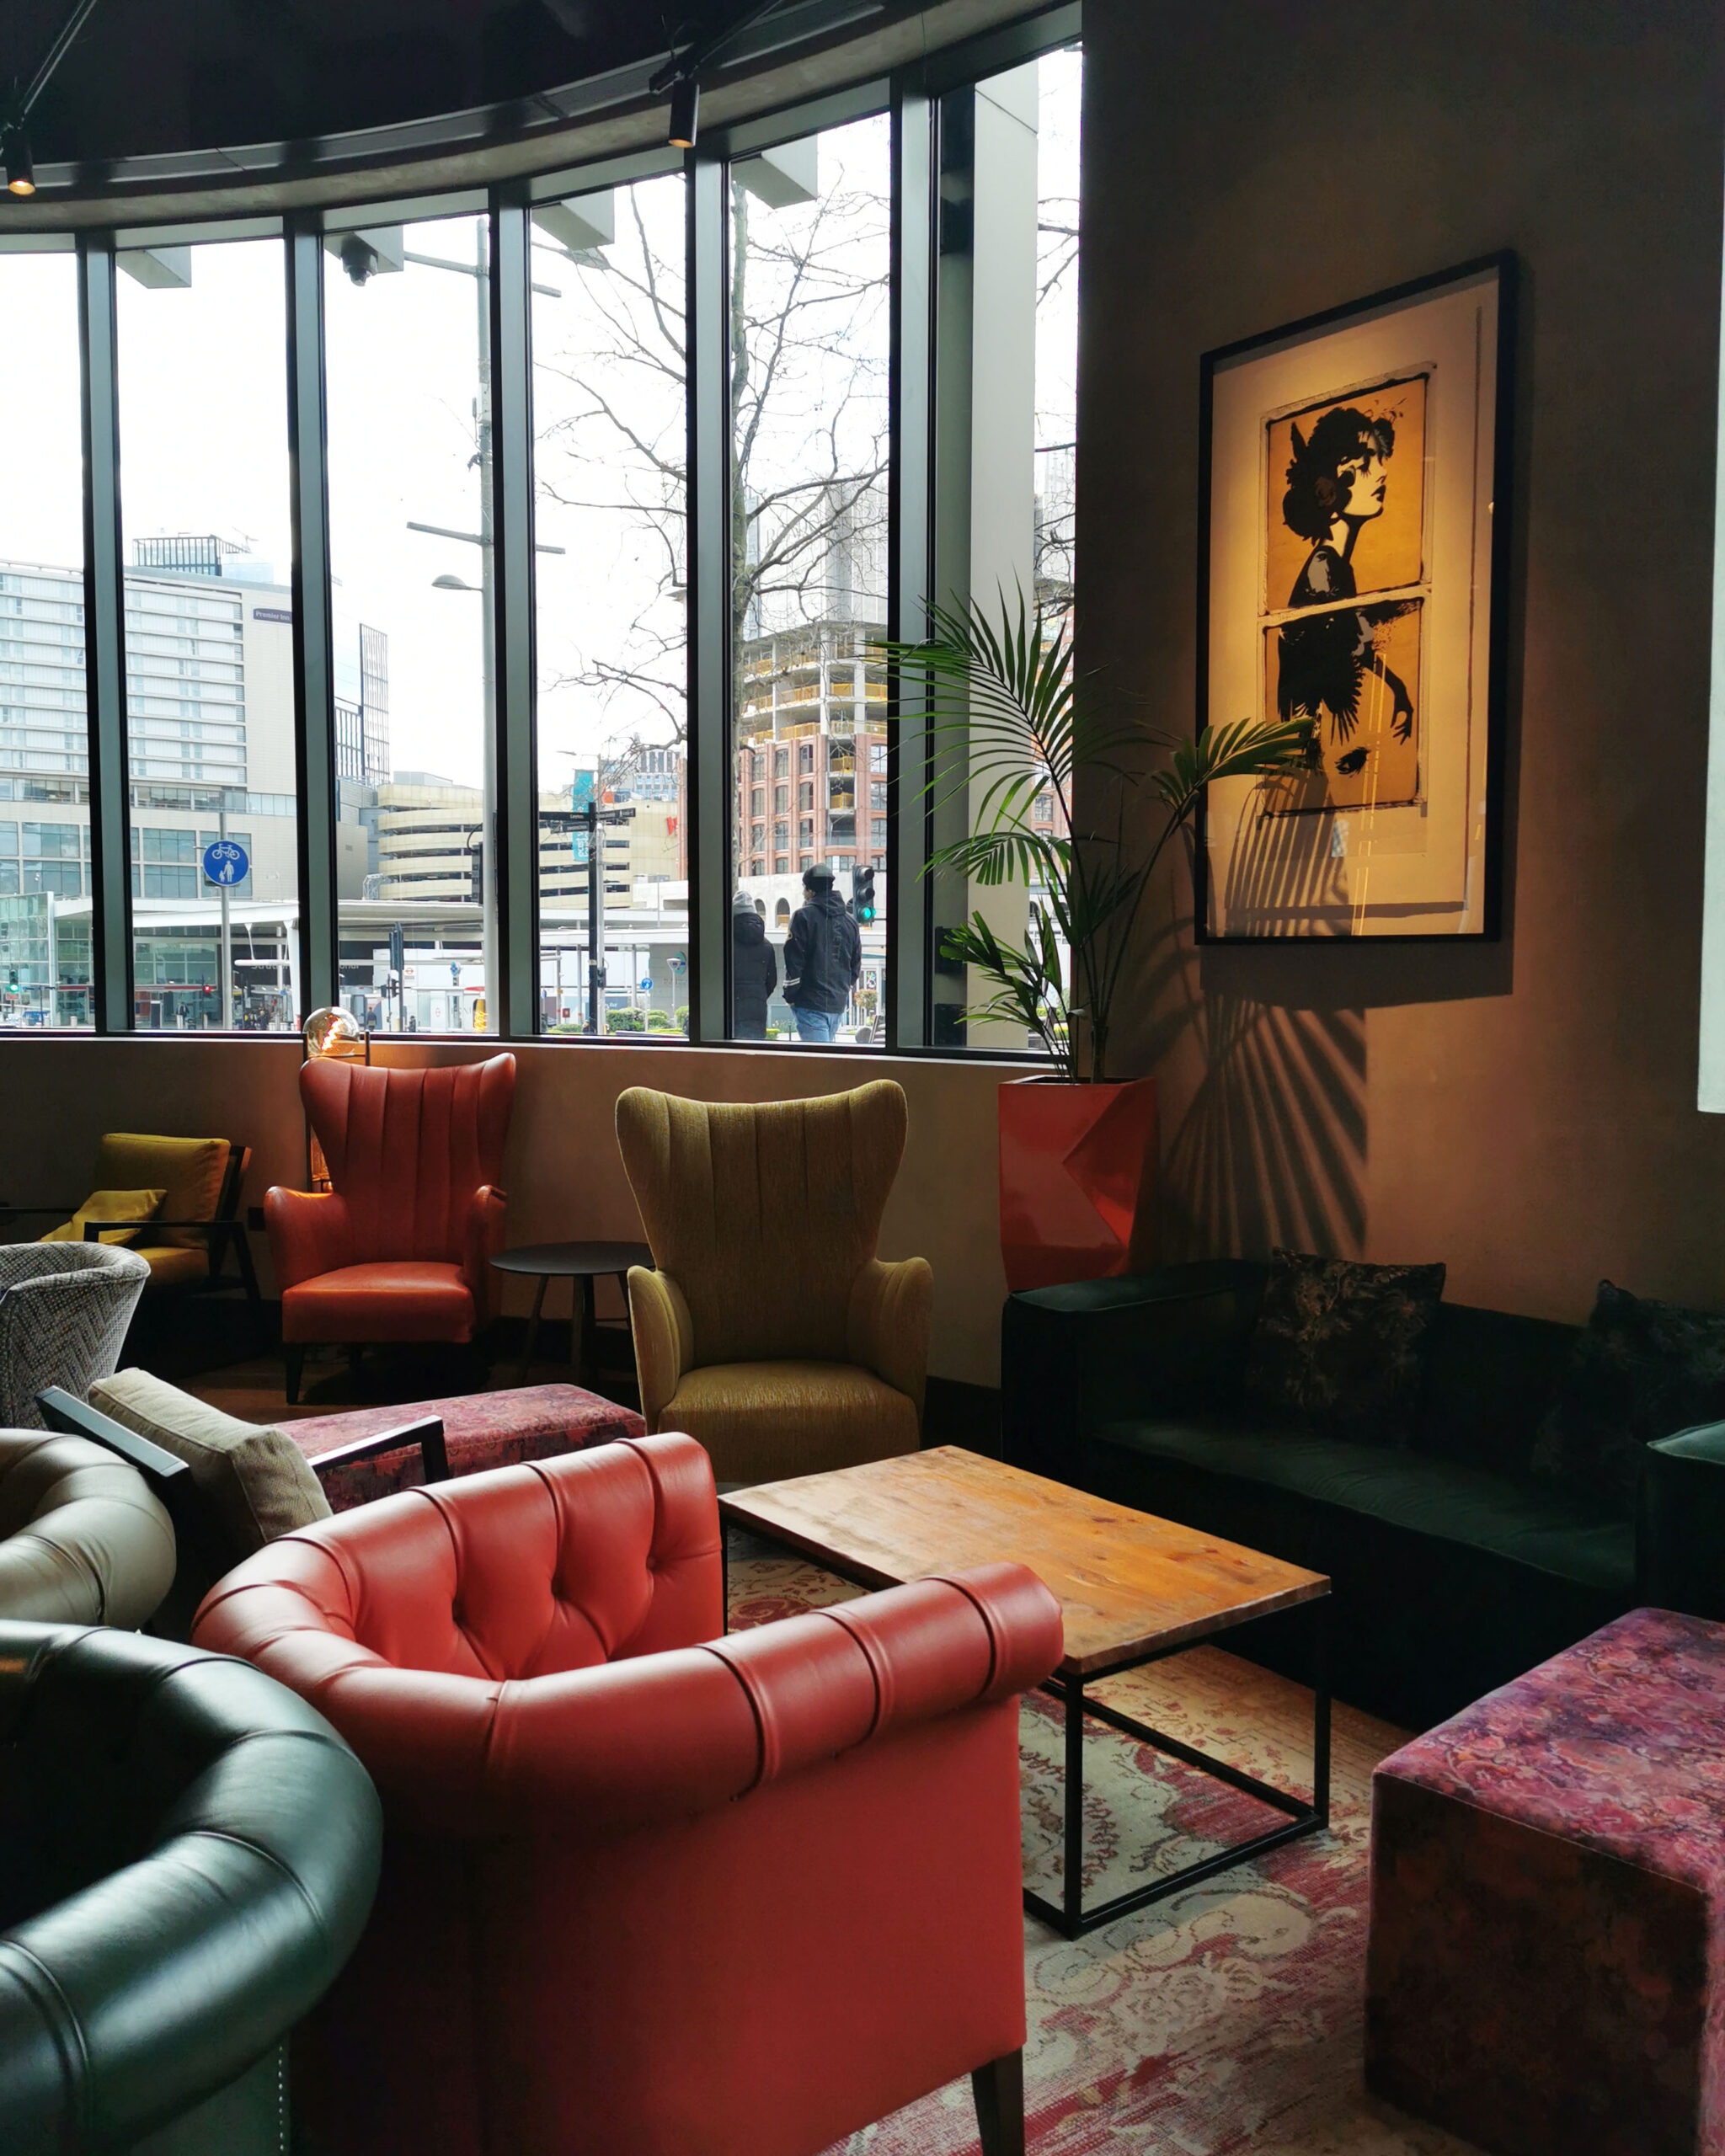 The Gantry London, Stratford, London, London Date, London Hotel, Hotel Review, London Weekend, the Gantry, Hilton Curio Collection, the Frenchie Mummy